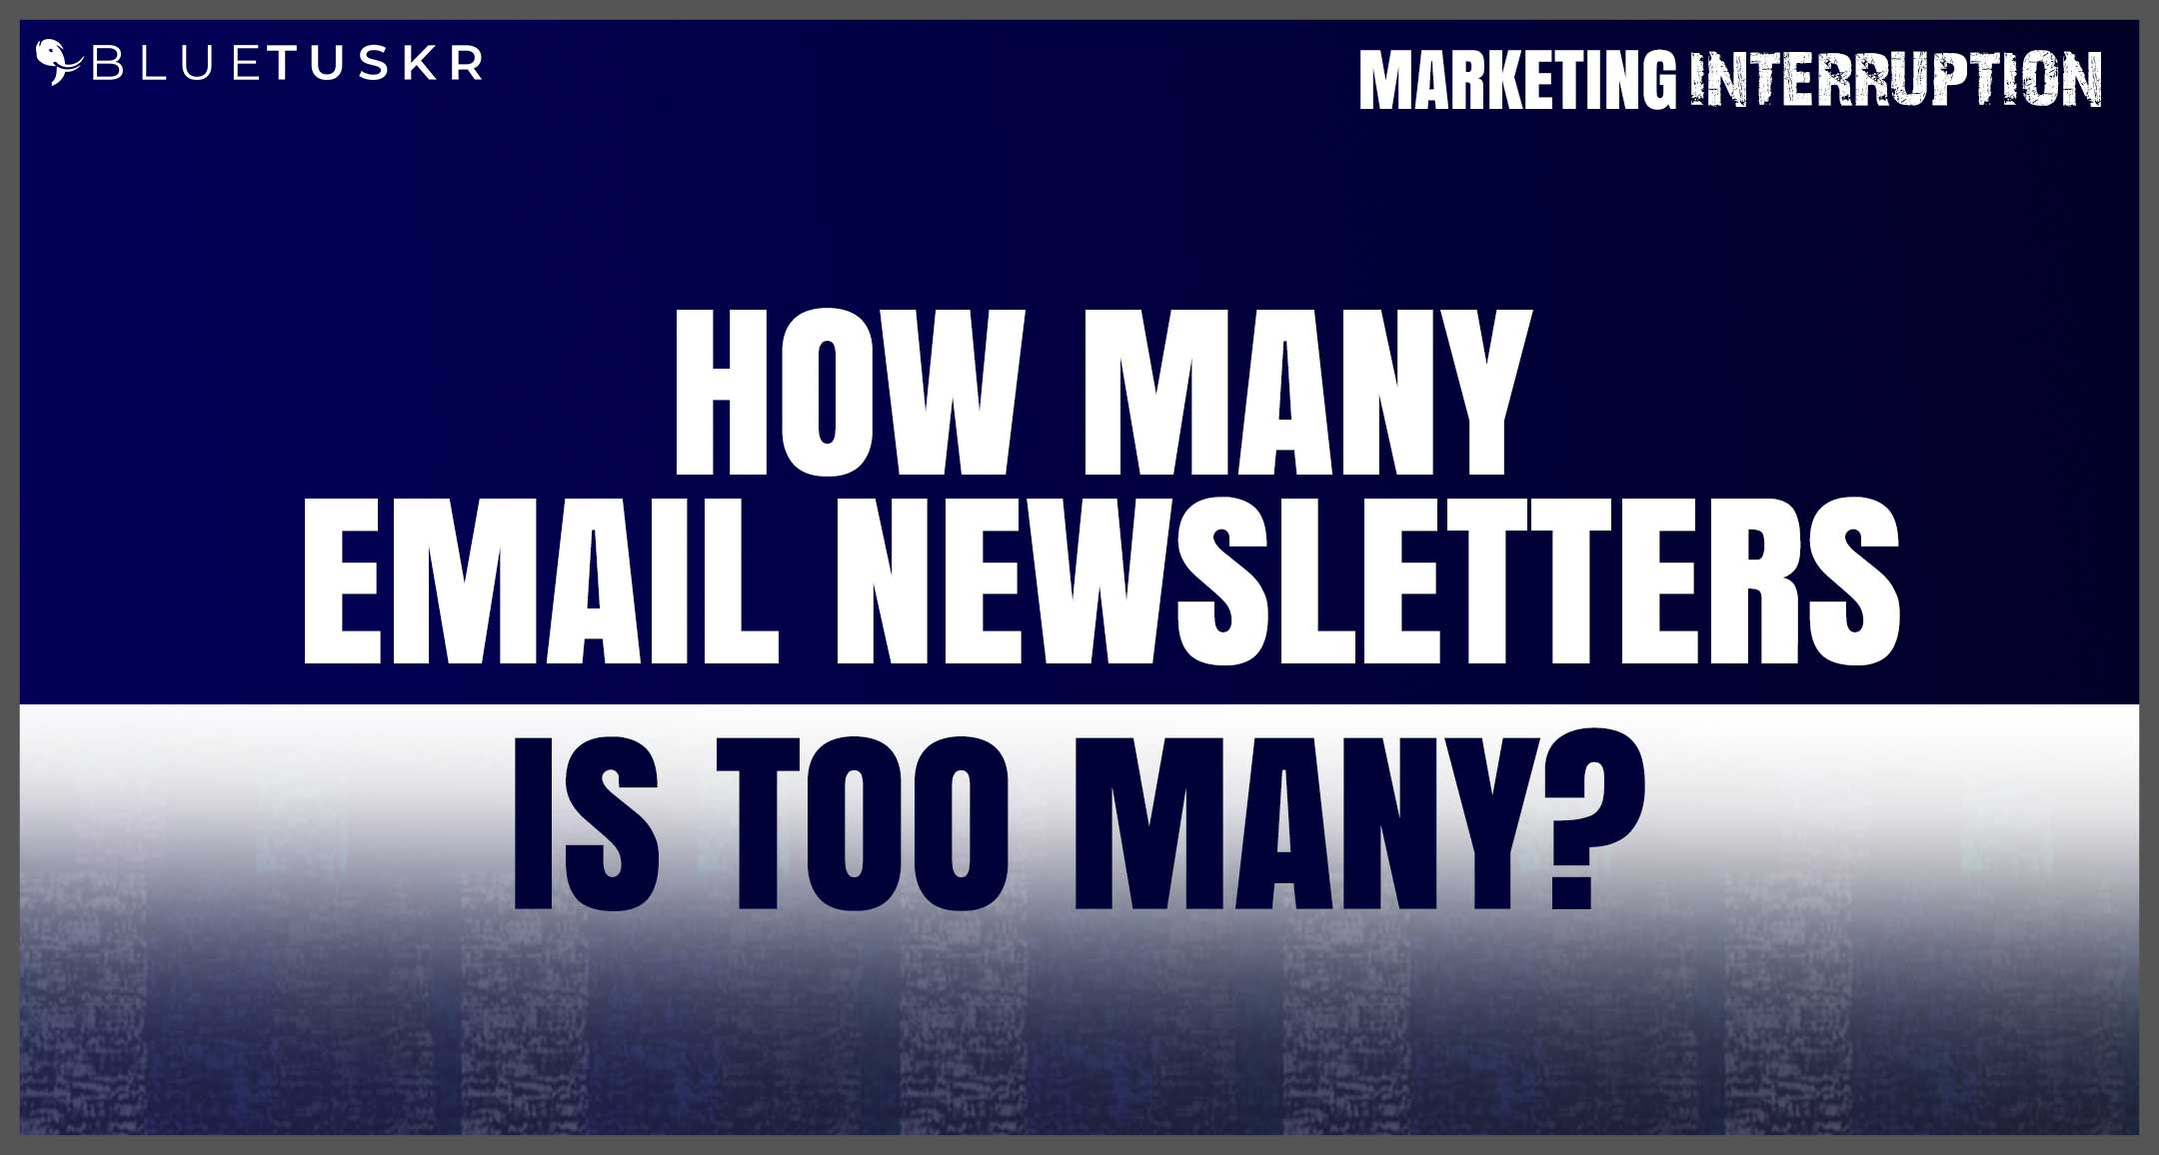 How Many Email Newsletters is Too Many?